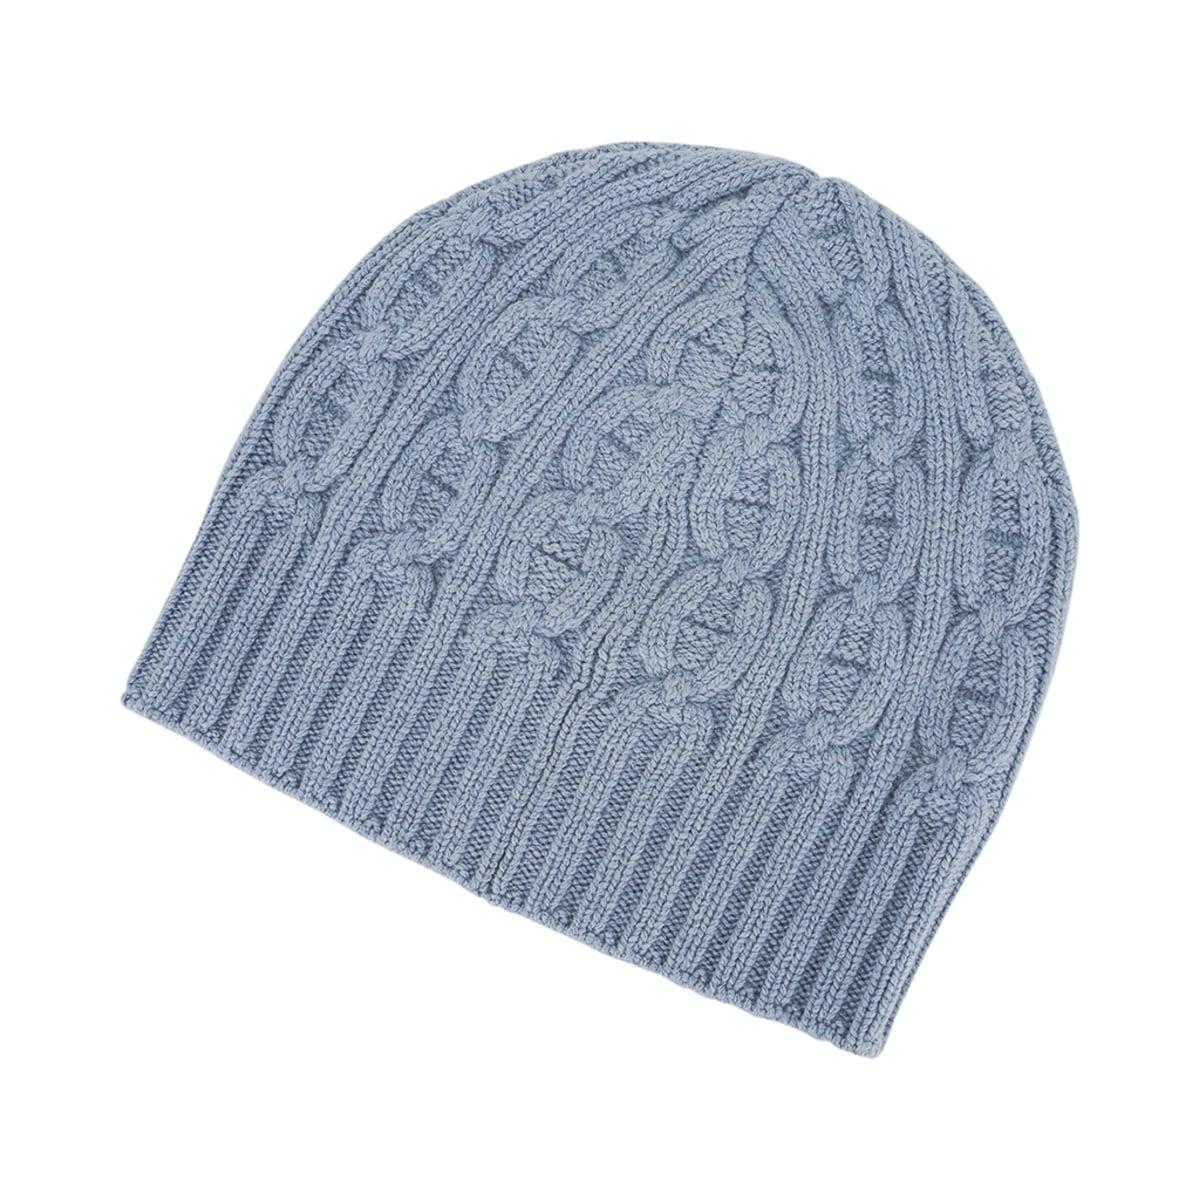 Mightychic offers an  Hermes Tri Maillon Beanie featured in Brume.
This terrific men's beanie cap has the Tri Maillon motif in relief.
Ribbed edge.
100% Cashmere.
Made in Italy
NEW or NEVER WORN.
final sale

SIZE: M

CONDITION:
NEW or NEVER WORN